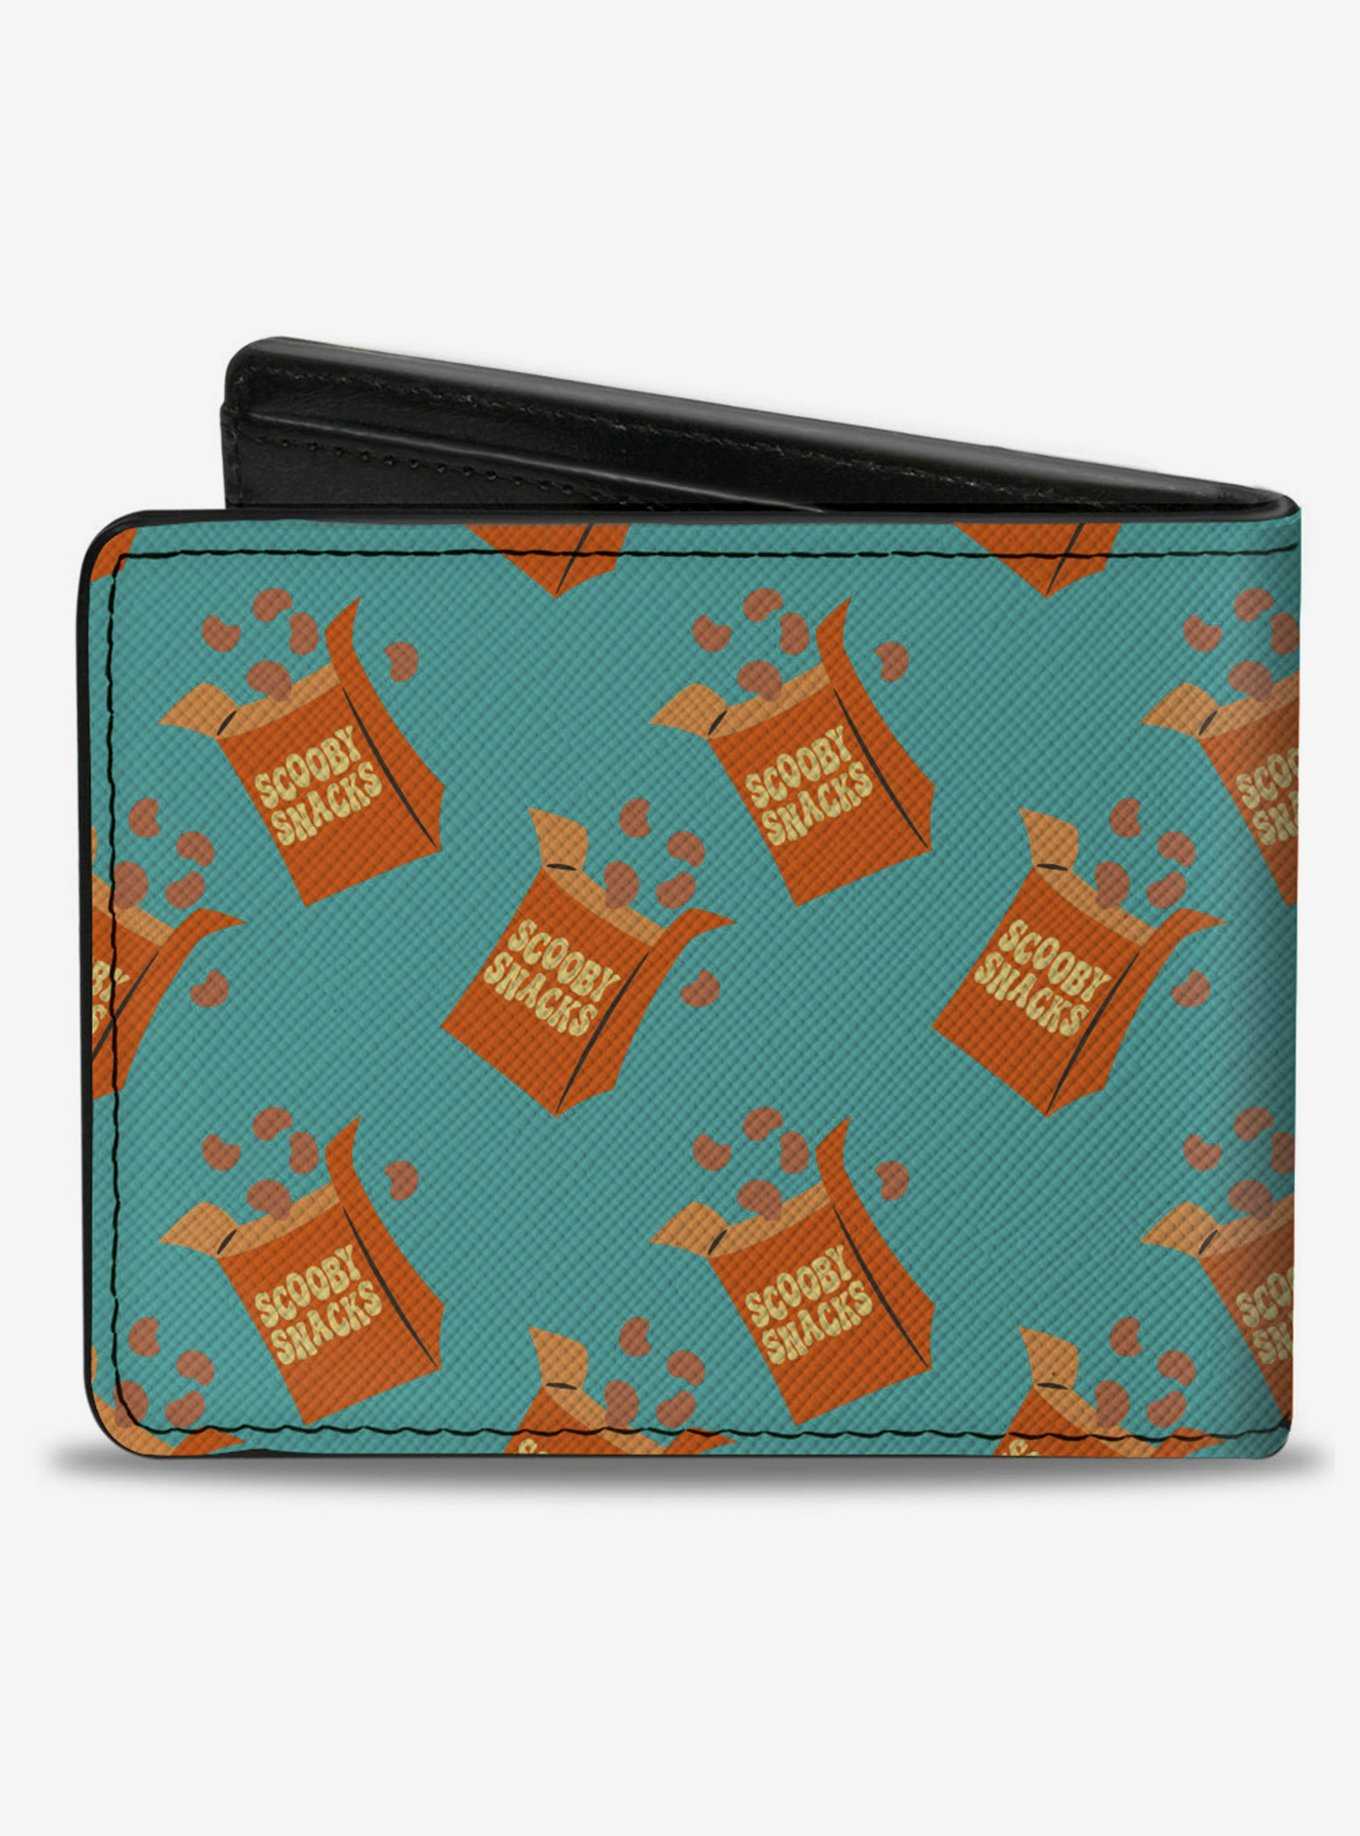 Scooby-Doo! Scooby Snacks Box Collage Bifold Wallet, , hi-res